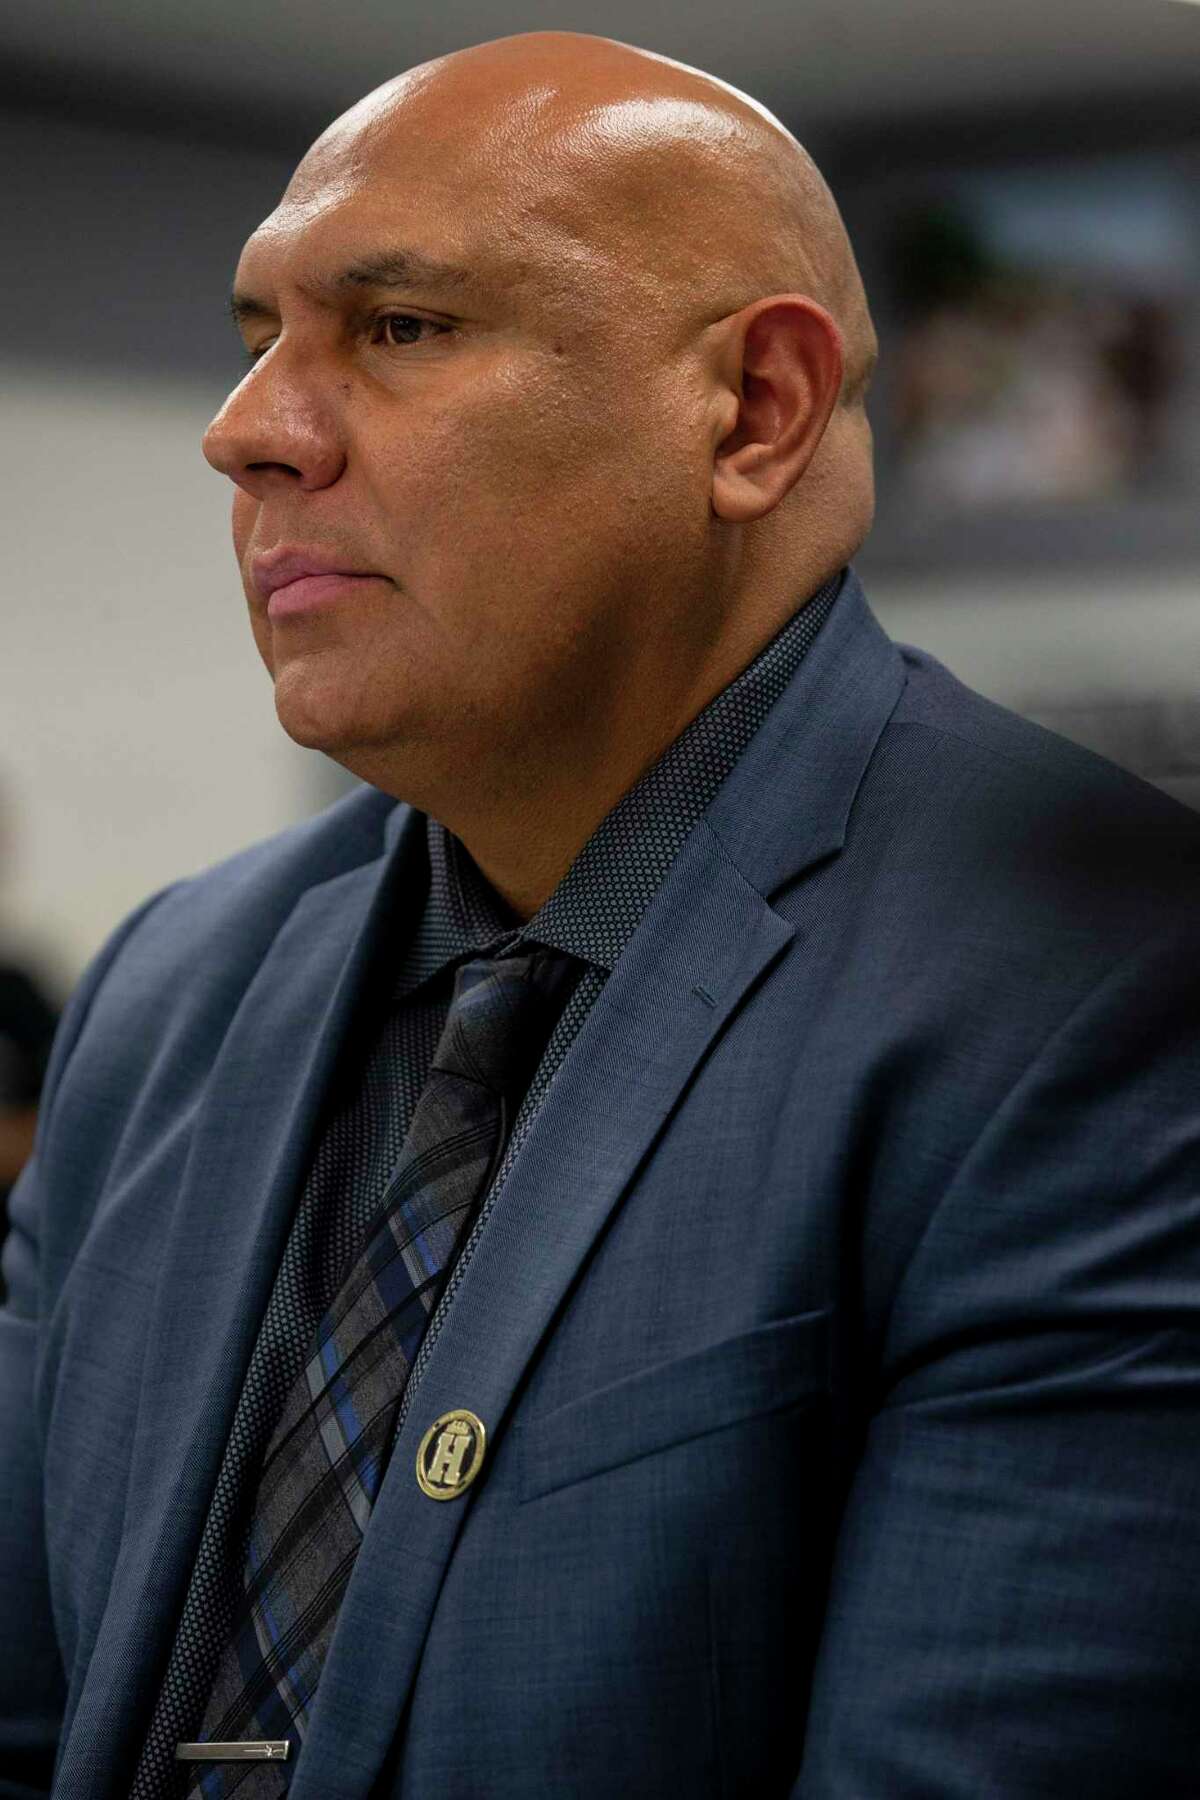 Gerardo Soto, Harlandale Independent School District’s executive director of operations, was formally hired Oct. 30, 2019, as the district’s new superintendent.